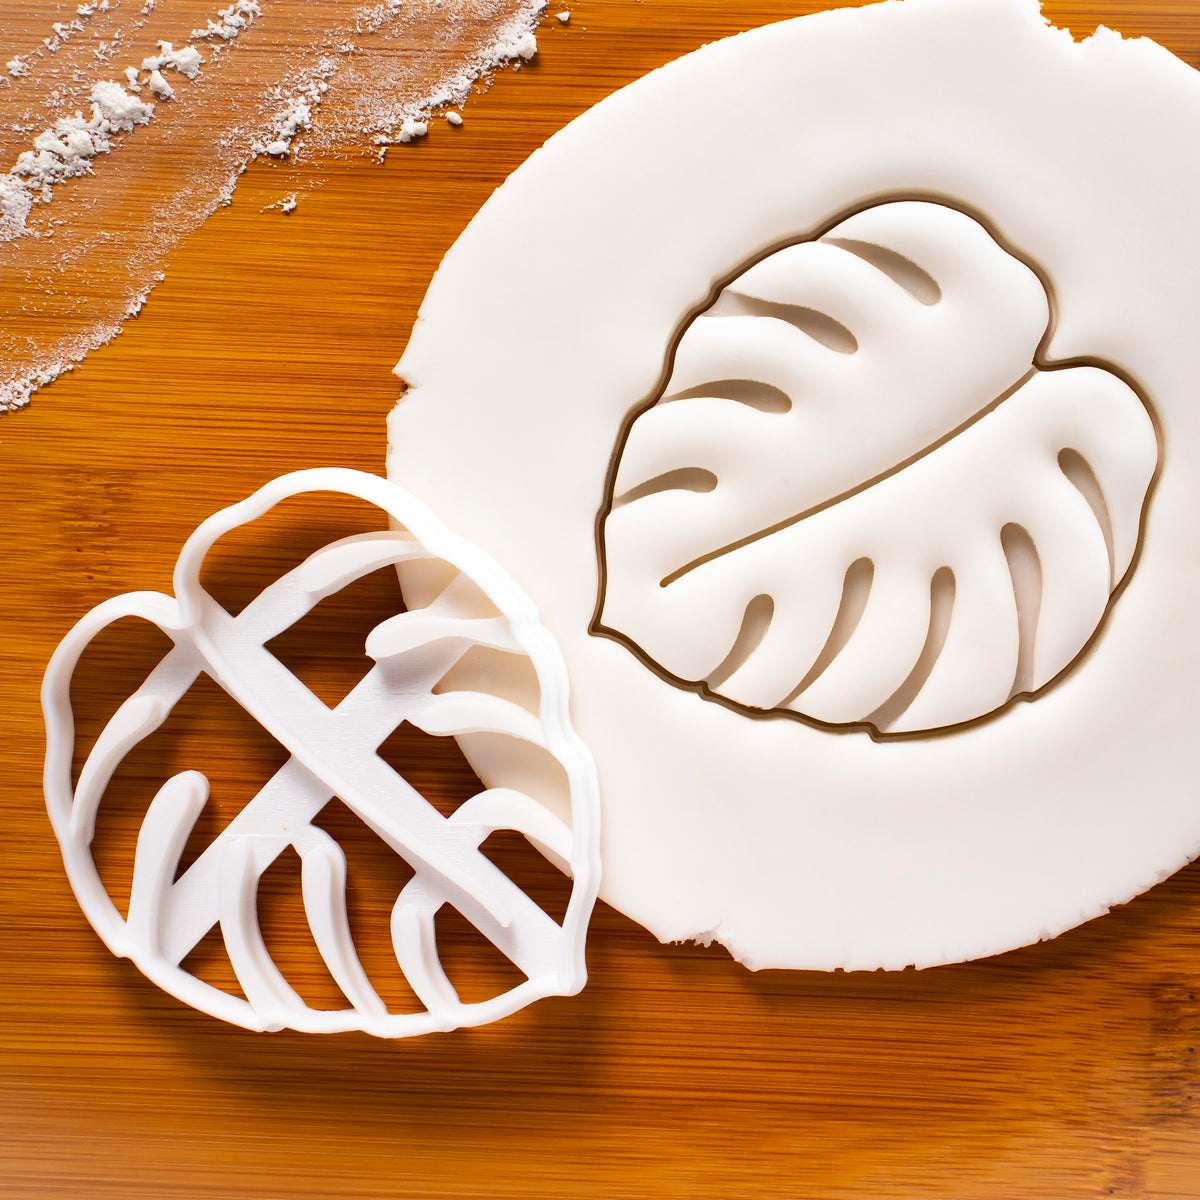 Monstera Leaf (Swiss Cheese Plant) Cookie Cutter